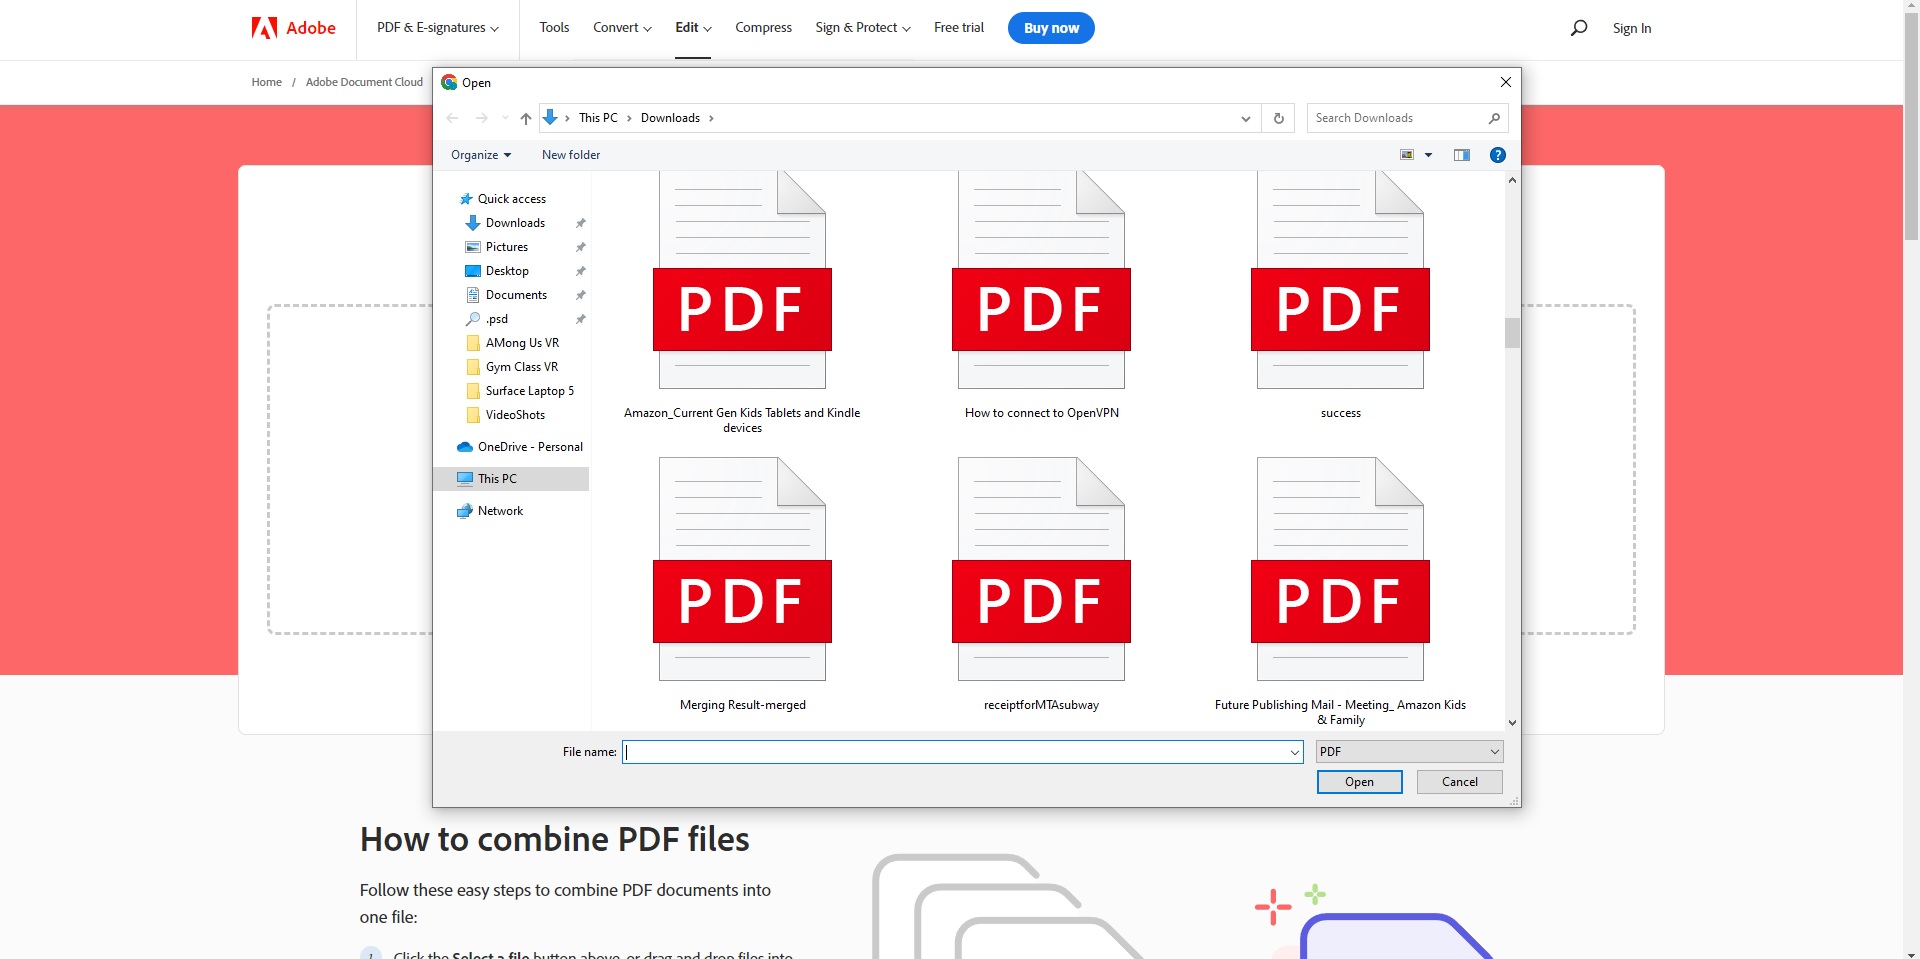 How to combine PDFs